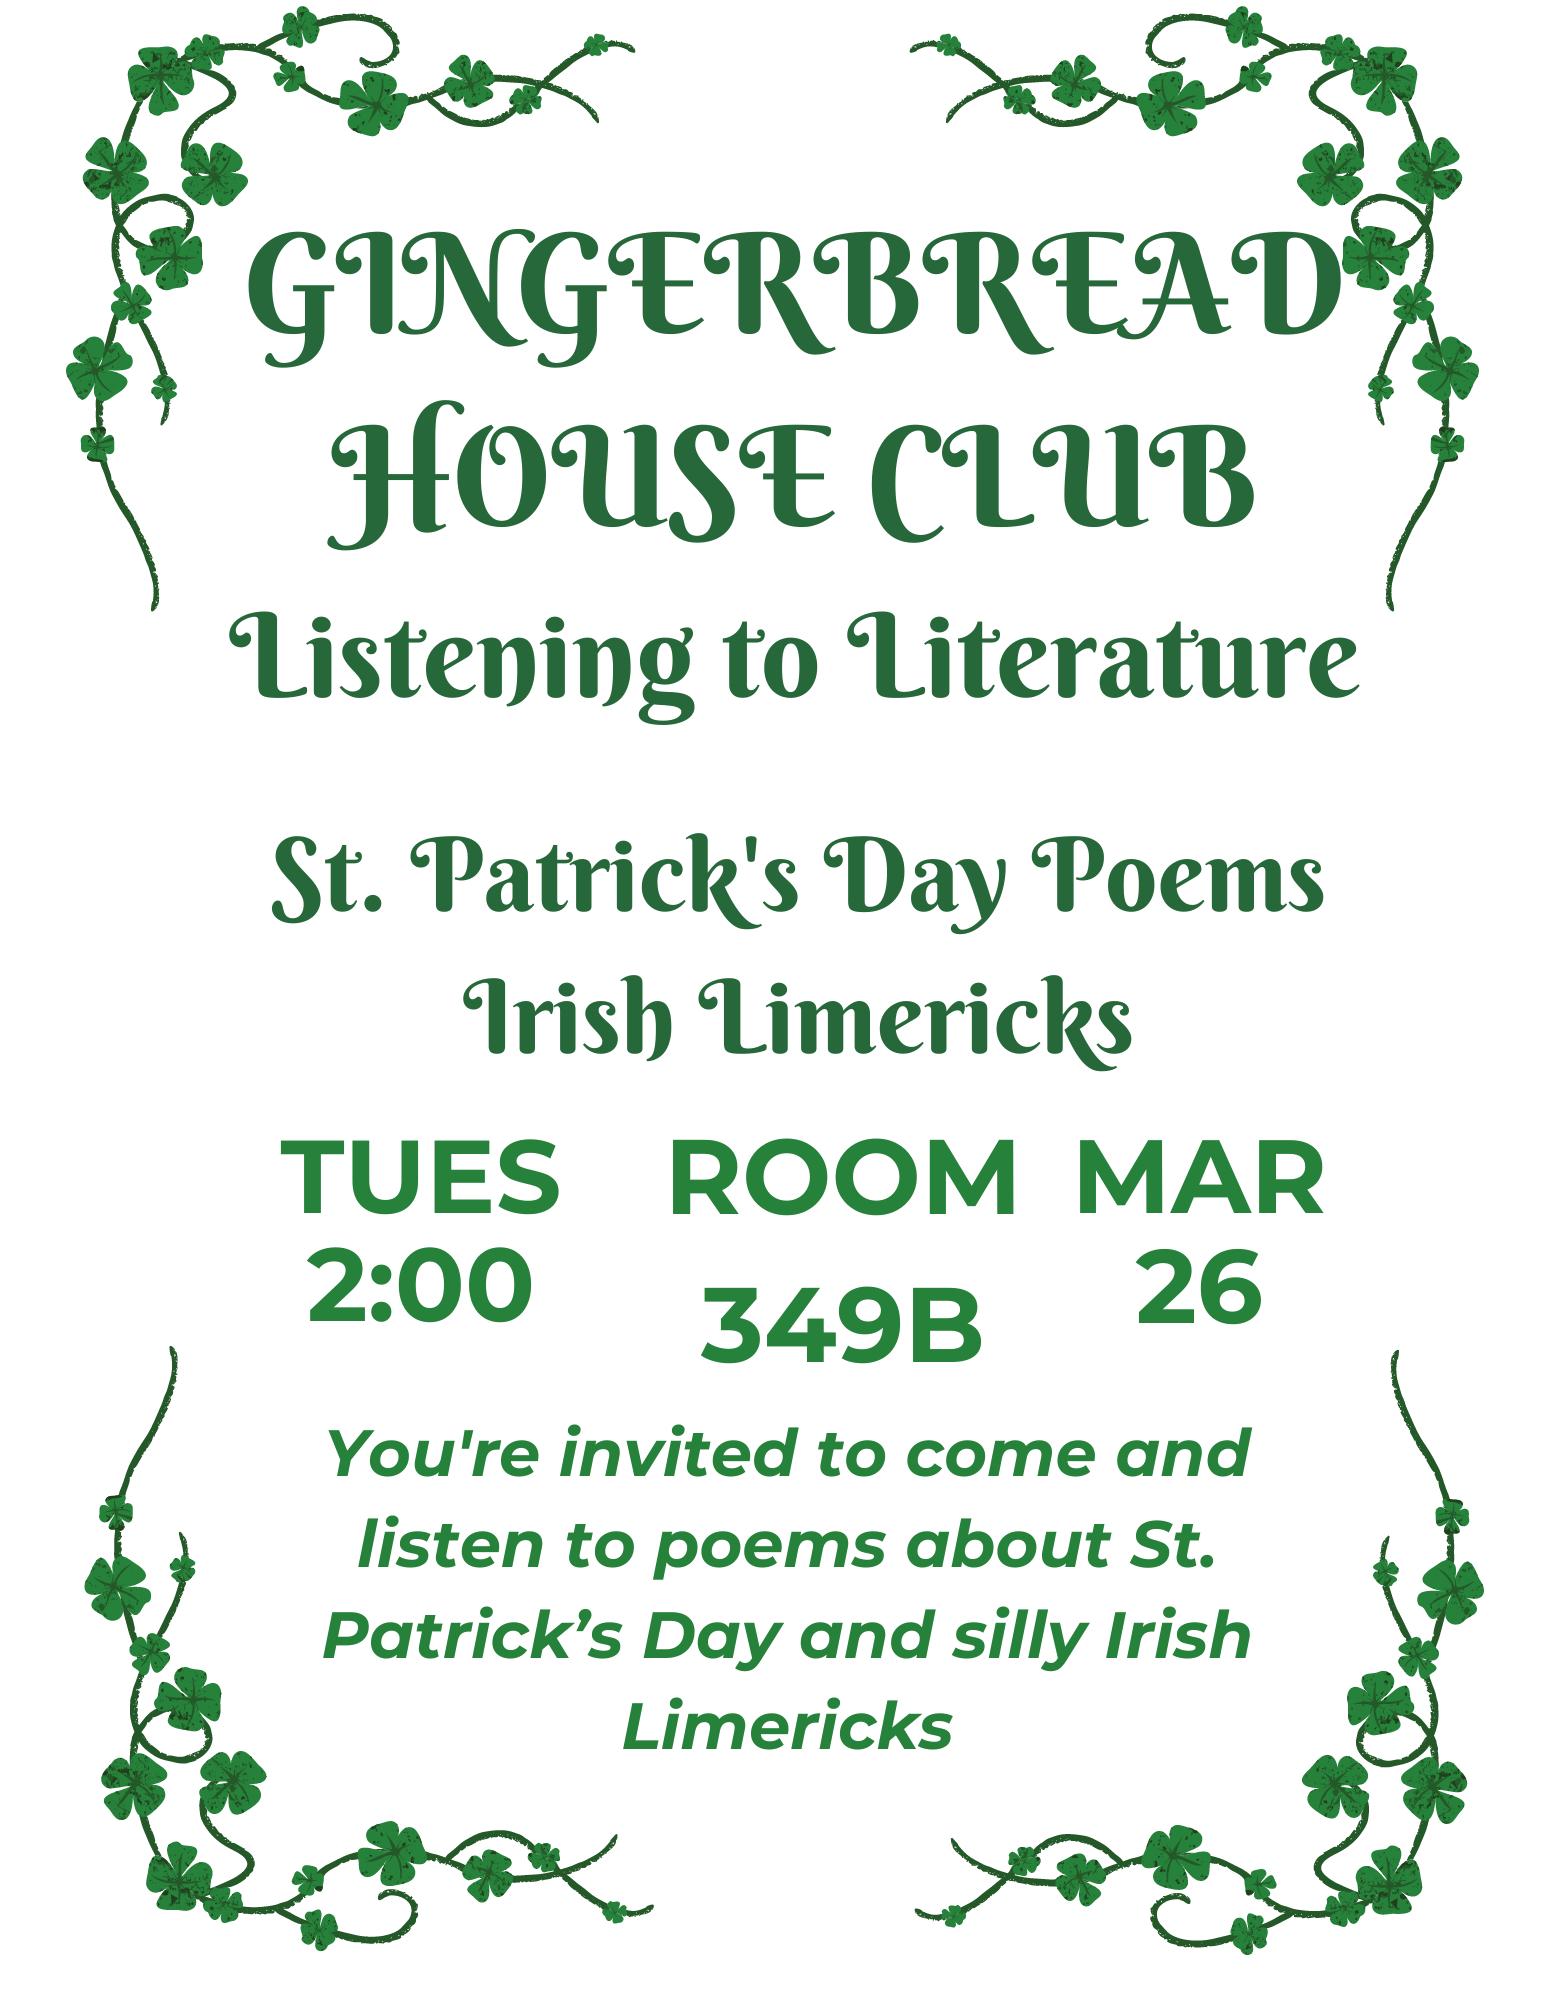 gingerbread+house+club+plans+for+all-things+Irish+at+March+meeting